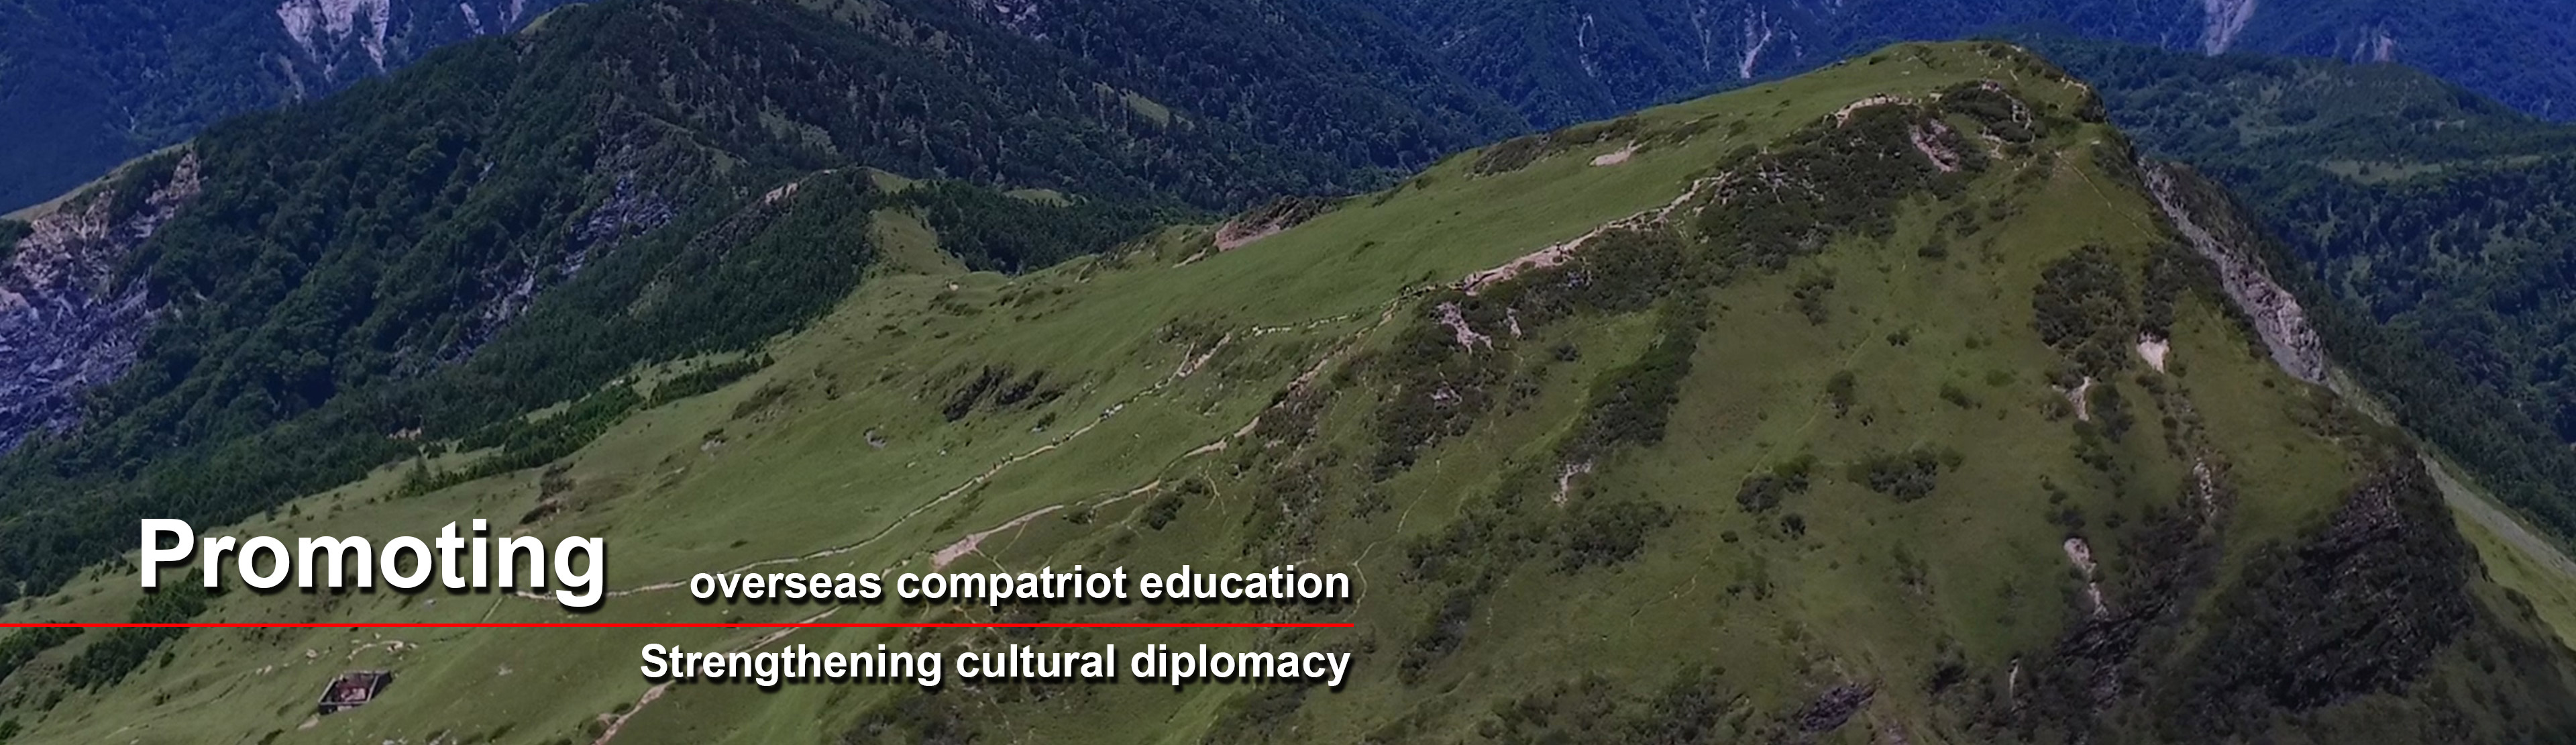 Promoting-overseas compatriot education-Strenghtening cultural diplomacy